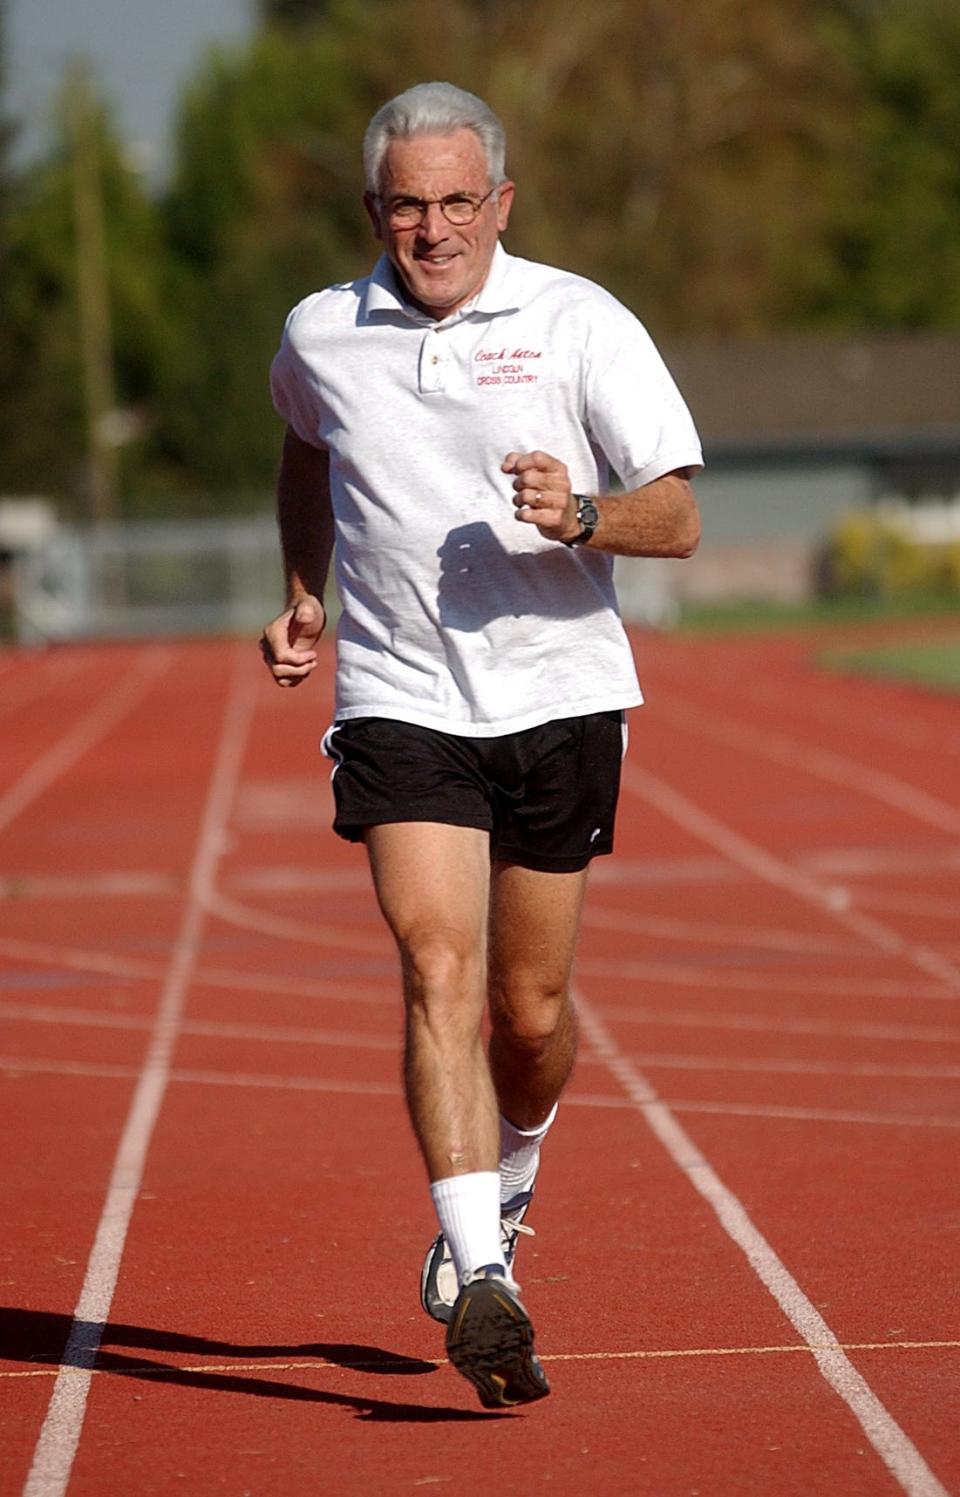 Tod Anton, seen here on Oct. 21, 2003, was superintendent of the Lincoln Unified School District for 18 years and long time Lincoln High School cross country coach.